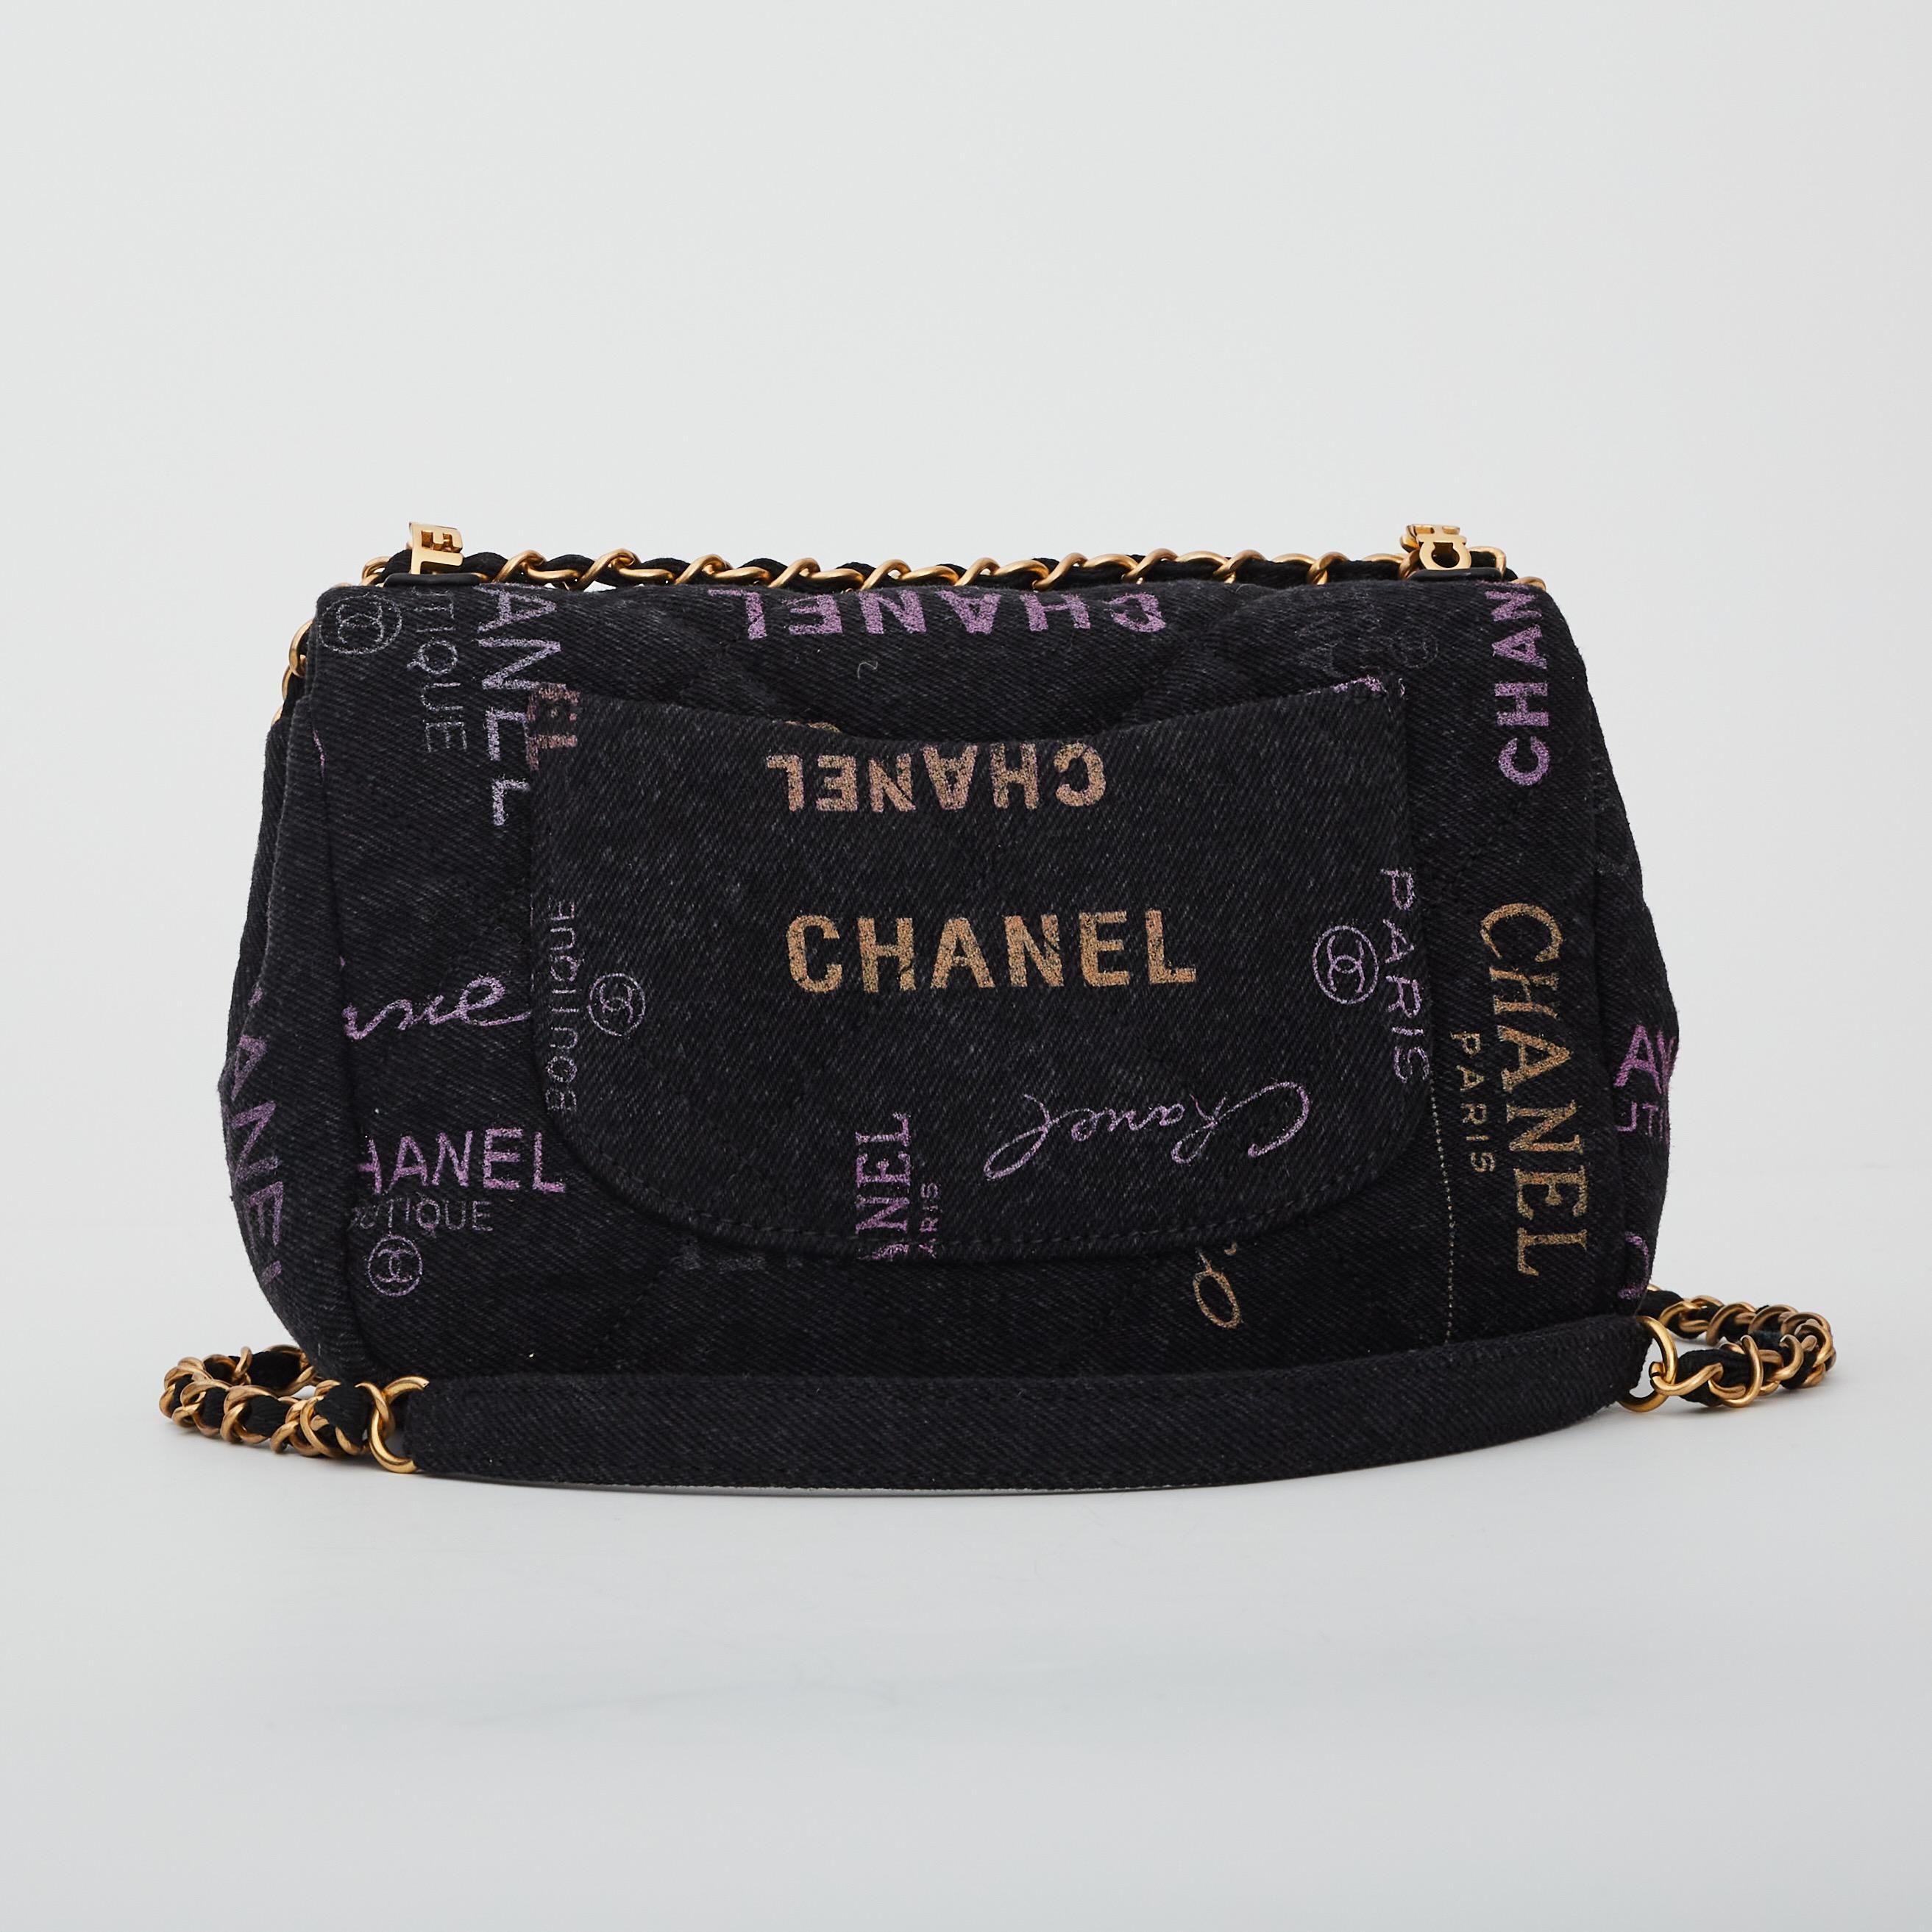 This flap bag is made from black denim. The bag features a crossbody canvas threaded aged gold chain shoulder strap. It also features a graffiti CC motif, and an aged gold Chanel CC turn lock that opens the flap to a matching fabric interior with a